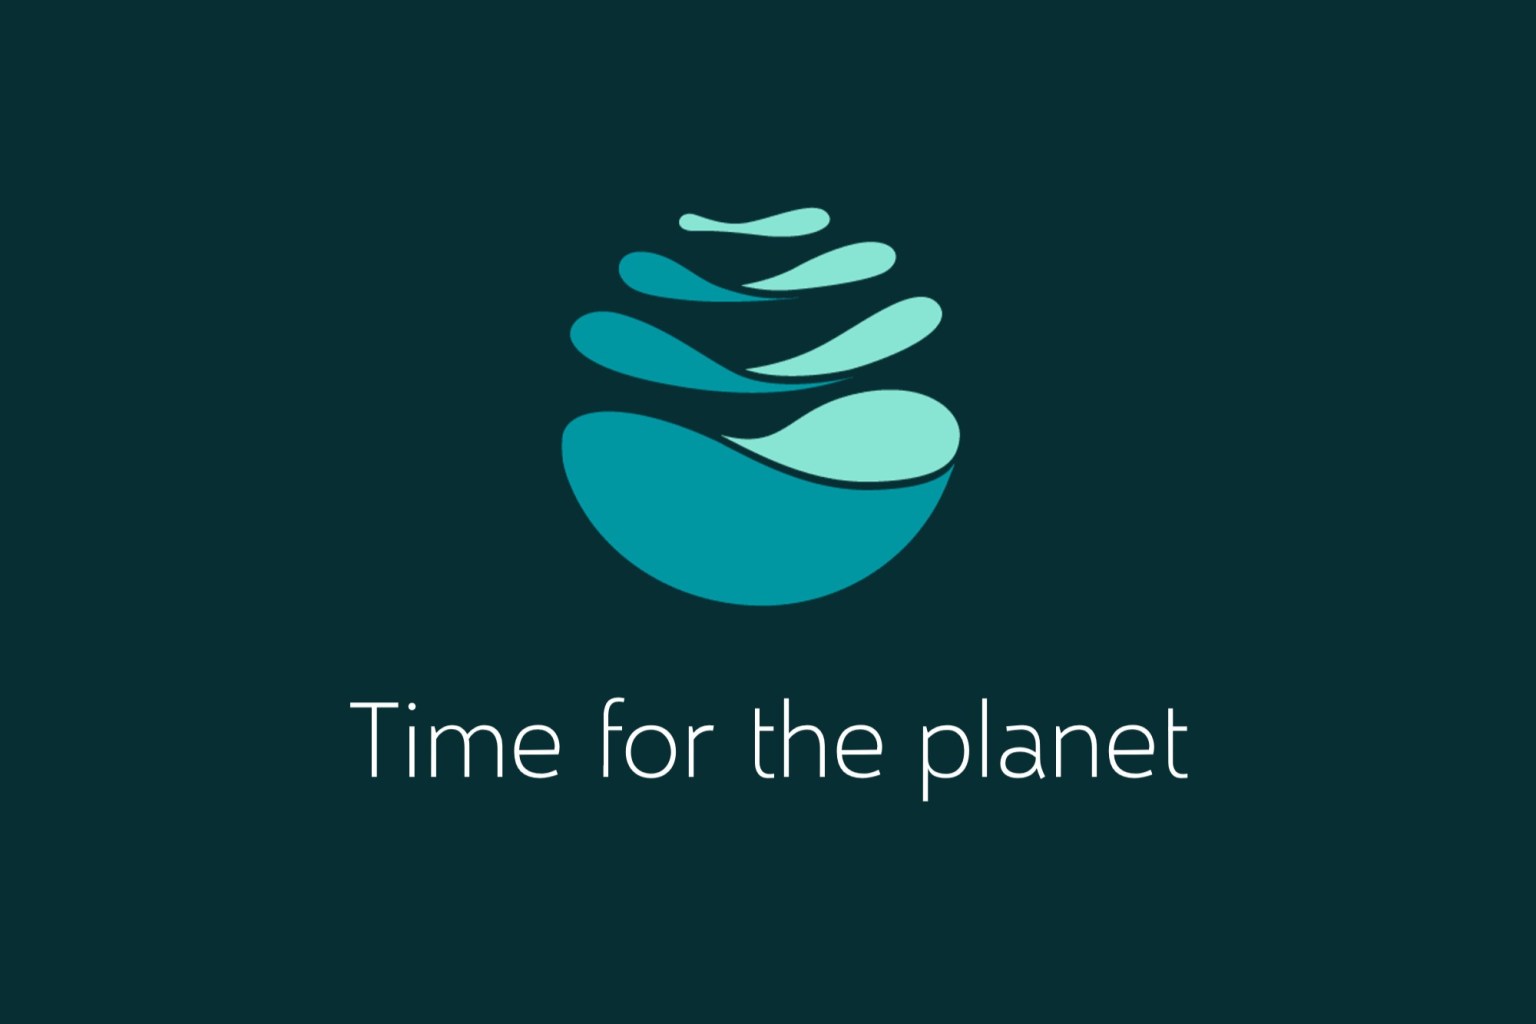 La vision d'entreprise guide vos actions_time for the planet_23MAY